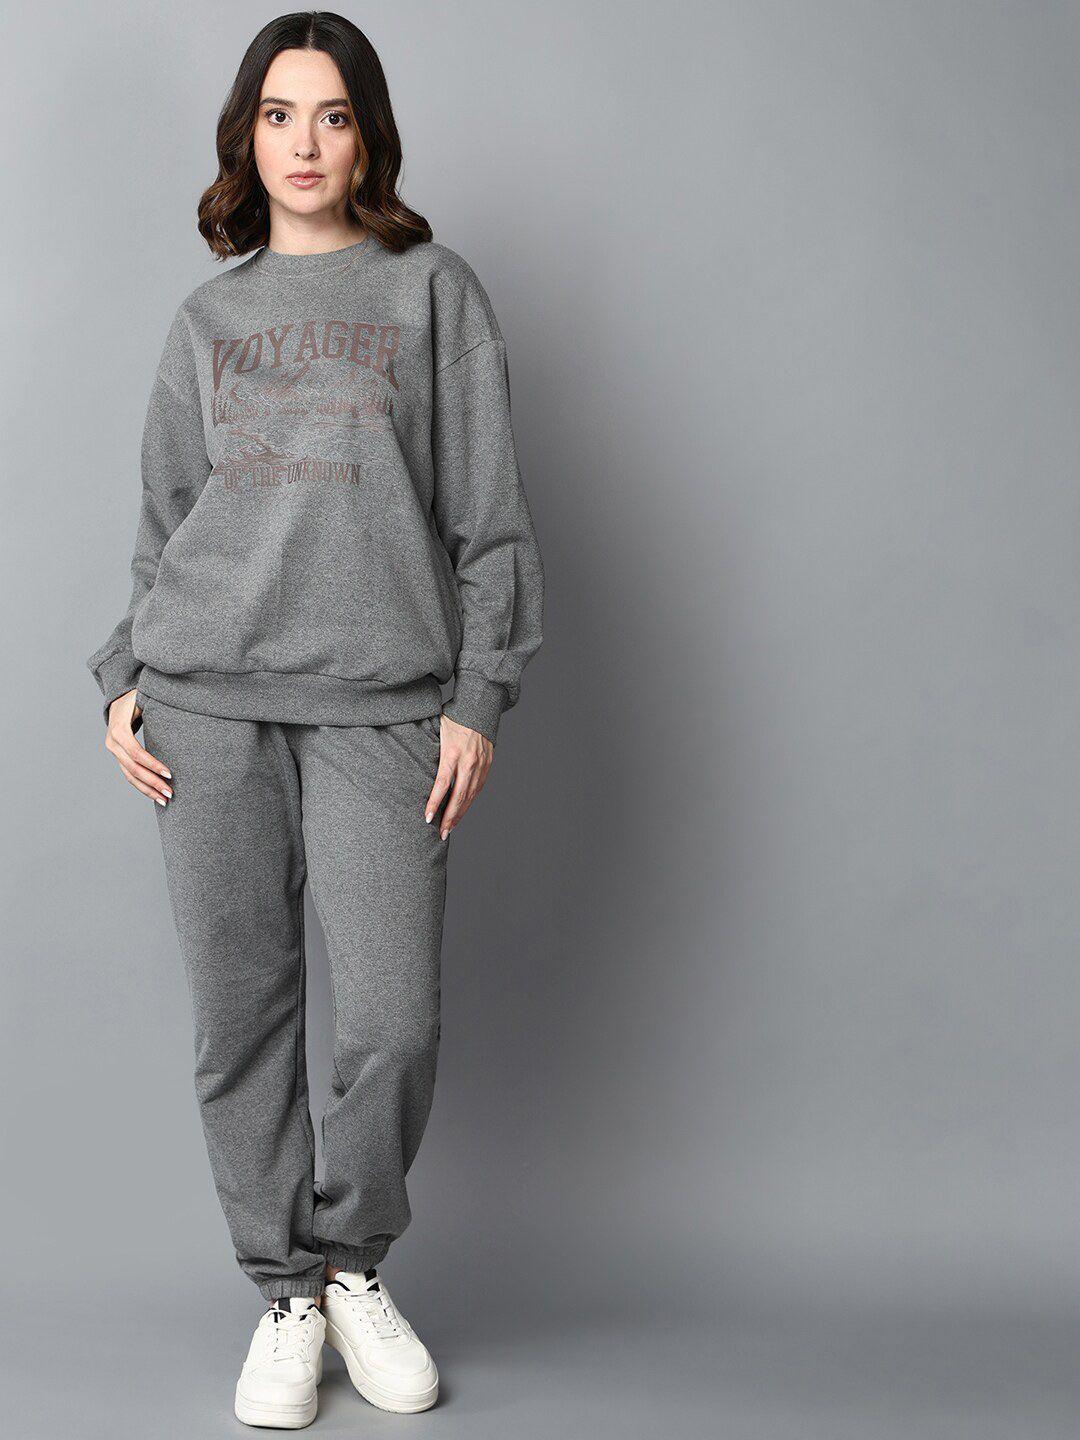 the roadster lifestyle co. grey typography printed tracksuit